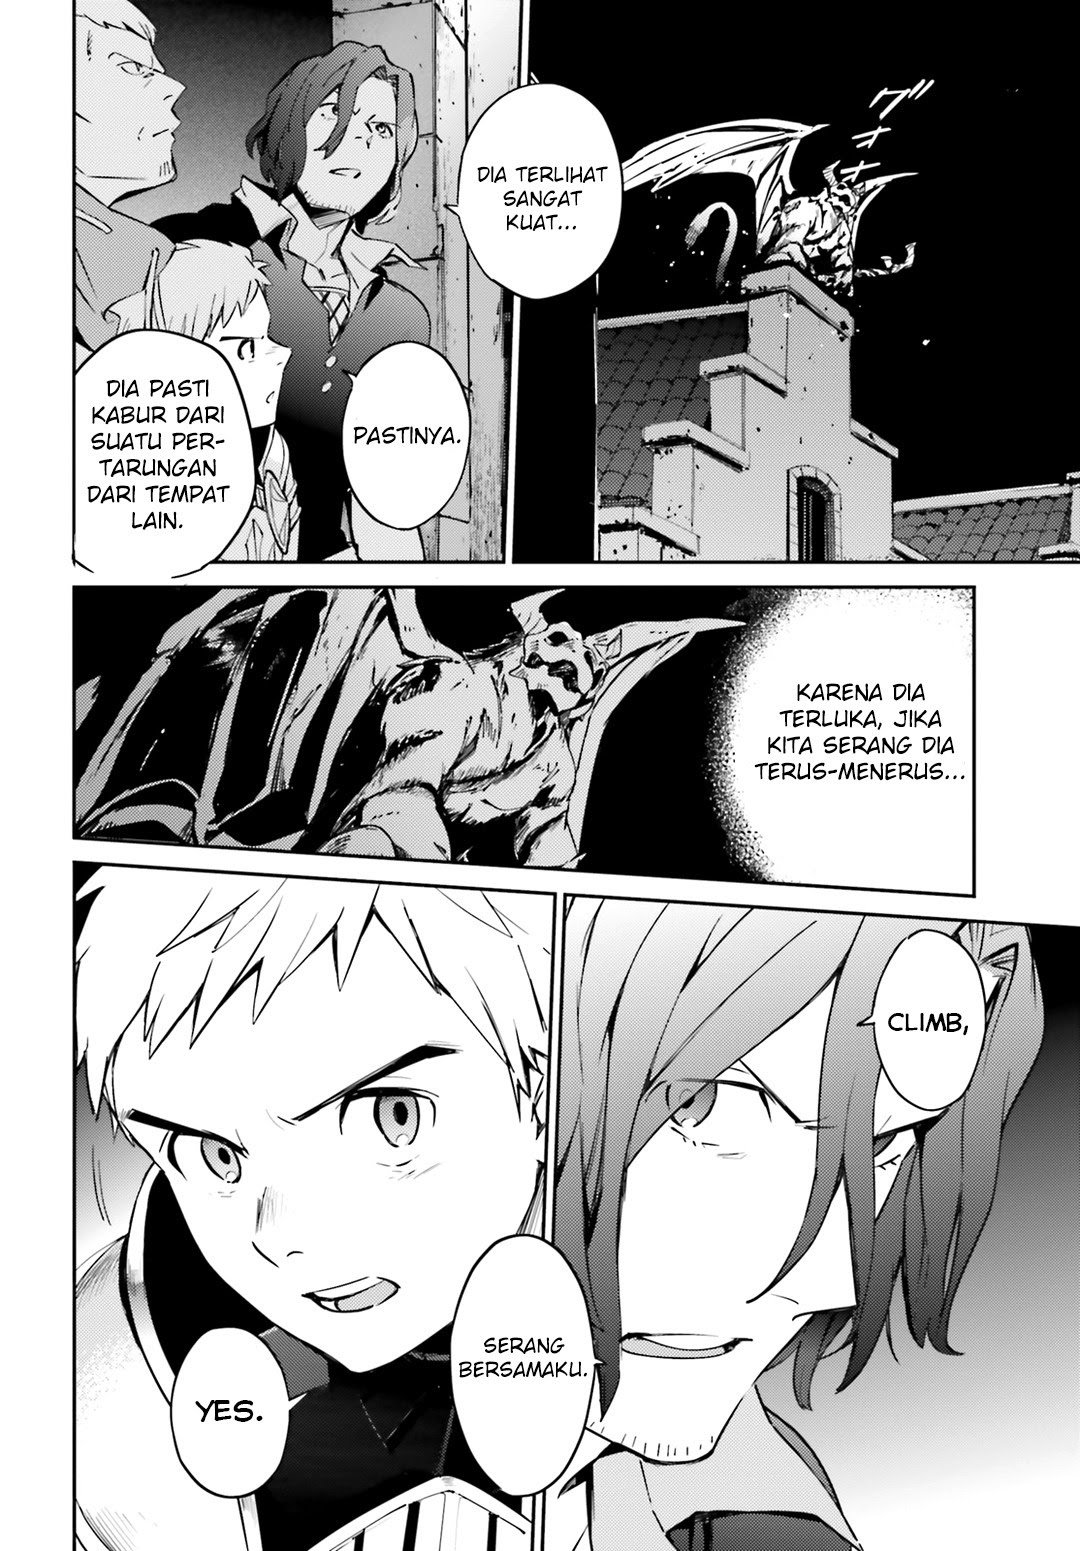 Overlord Chapter 51 39